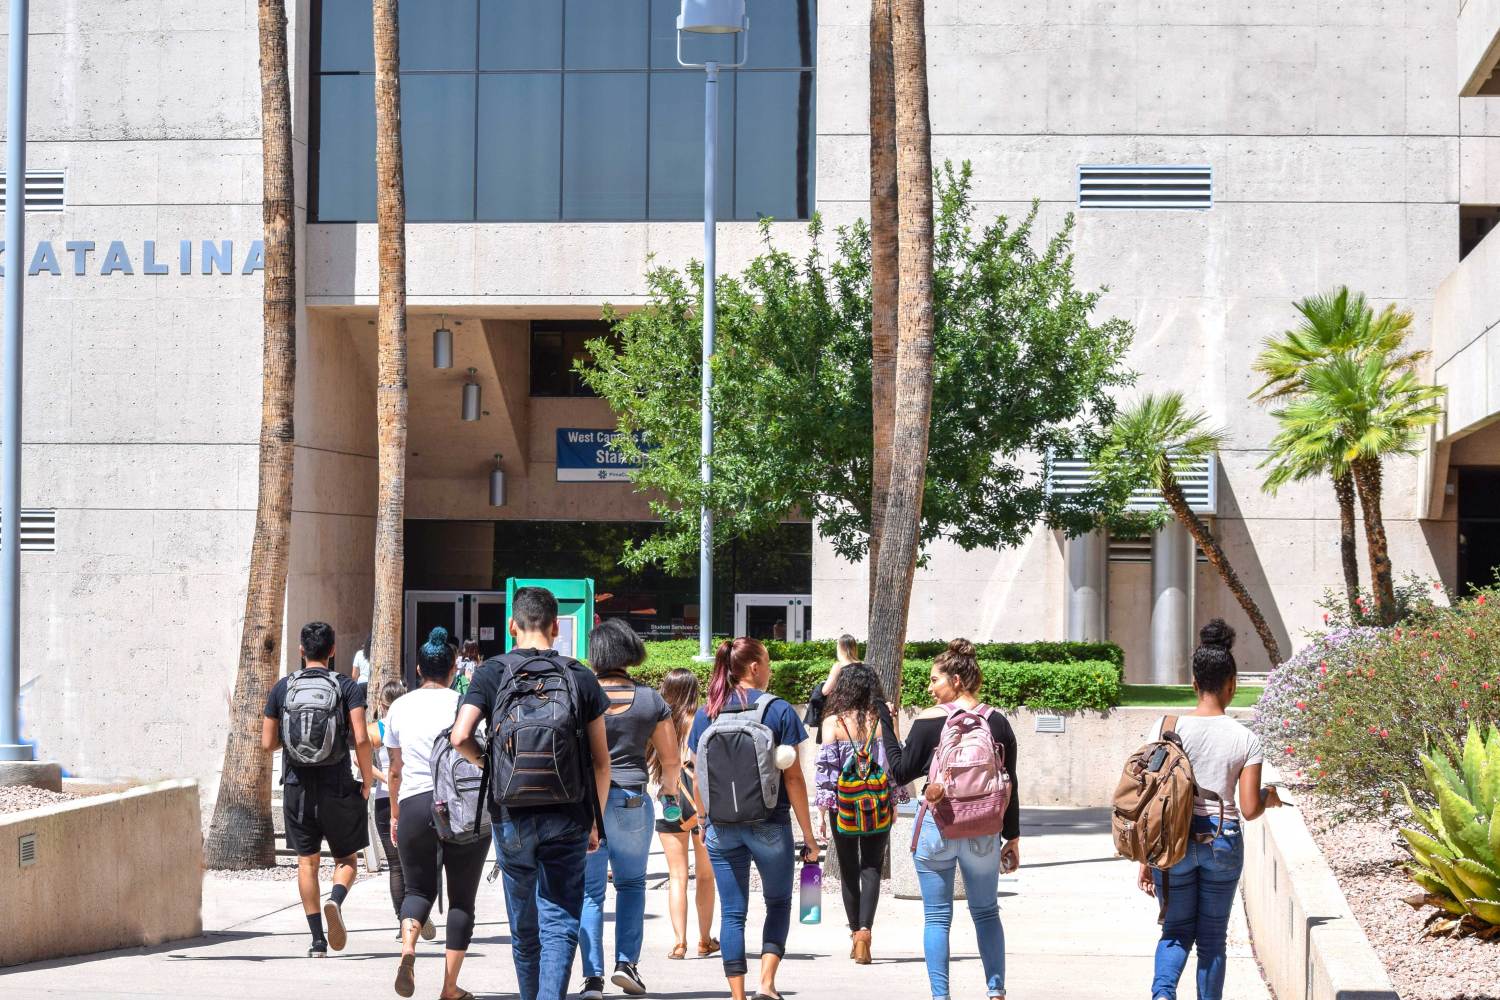 Students at Pima Community College West Campus are back to school in Tucson, Arizona.